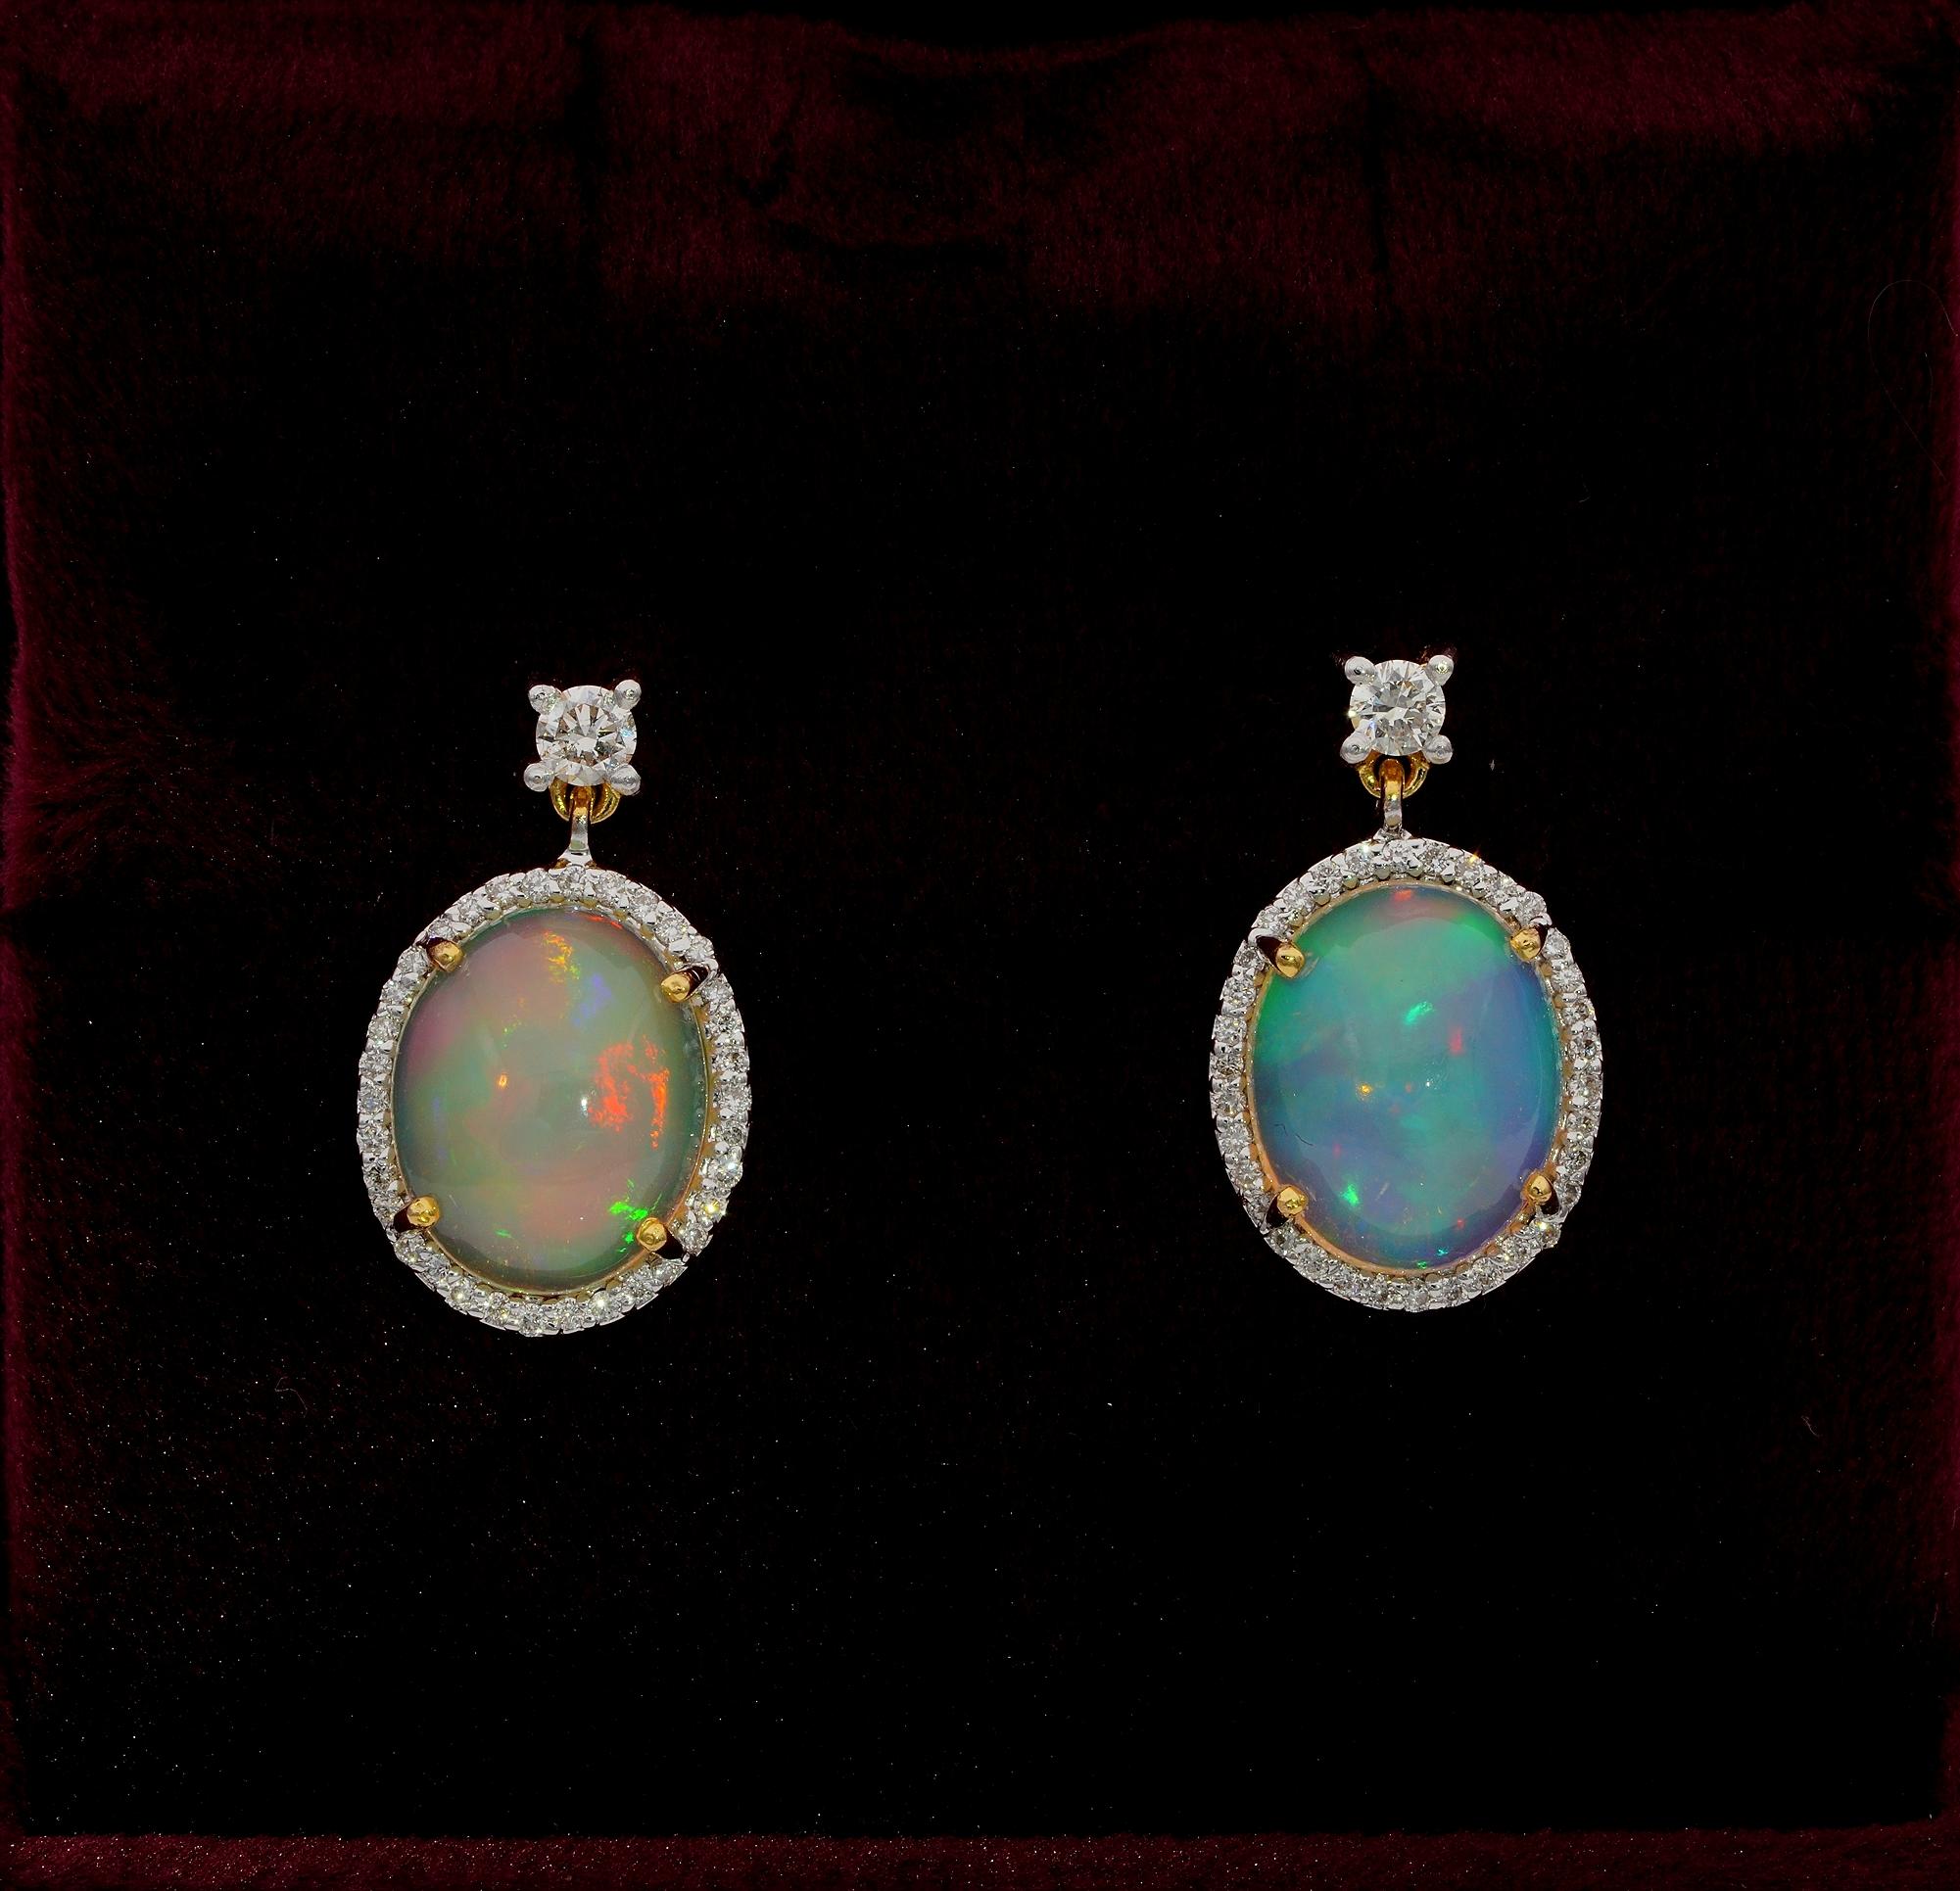 Magic Rainbow Dropping from Ears

Mesmerizing Opals are the star of these ear drops
Designed as swinging oval drops with two Opals surrounded by a halo of Diamonds topped by a small solitaire – hand crafted of solid 18 KT gold
Two deep cut natural